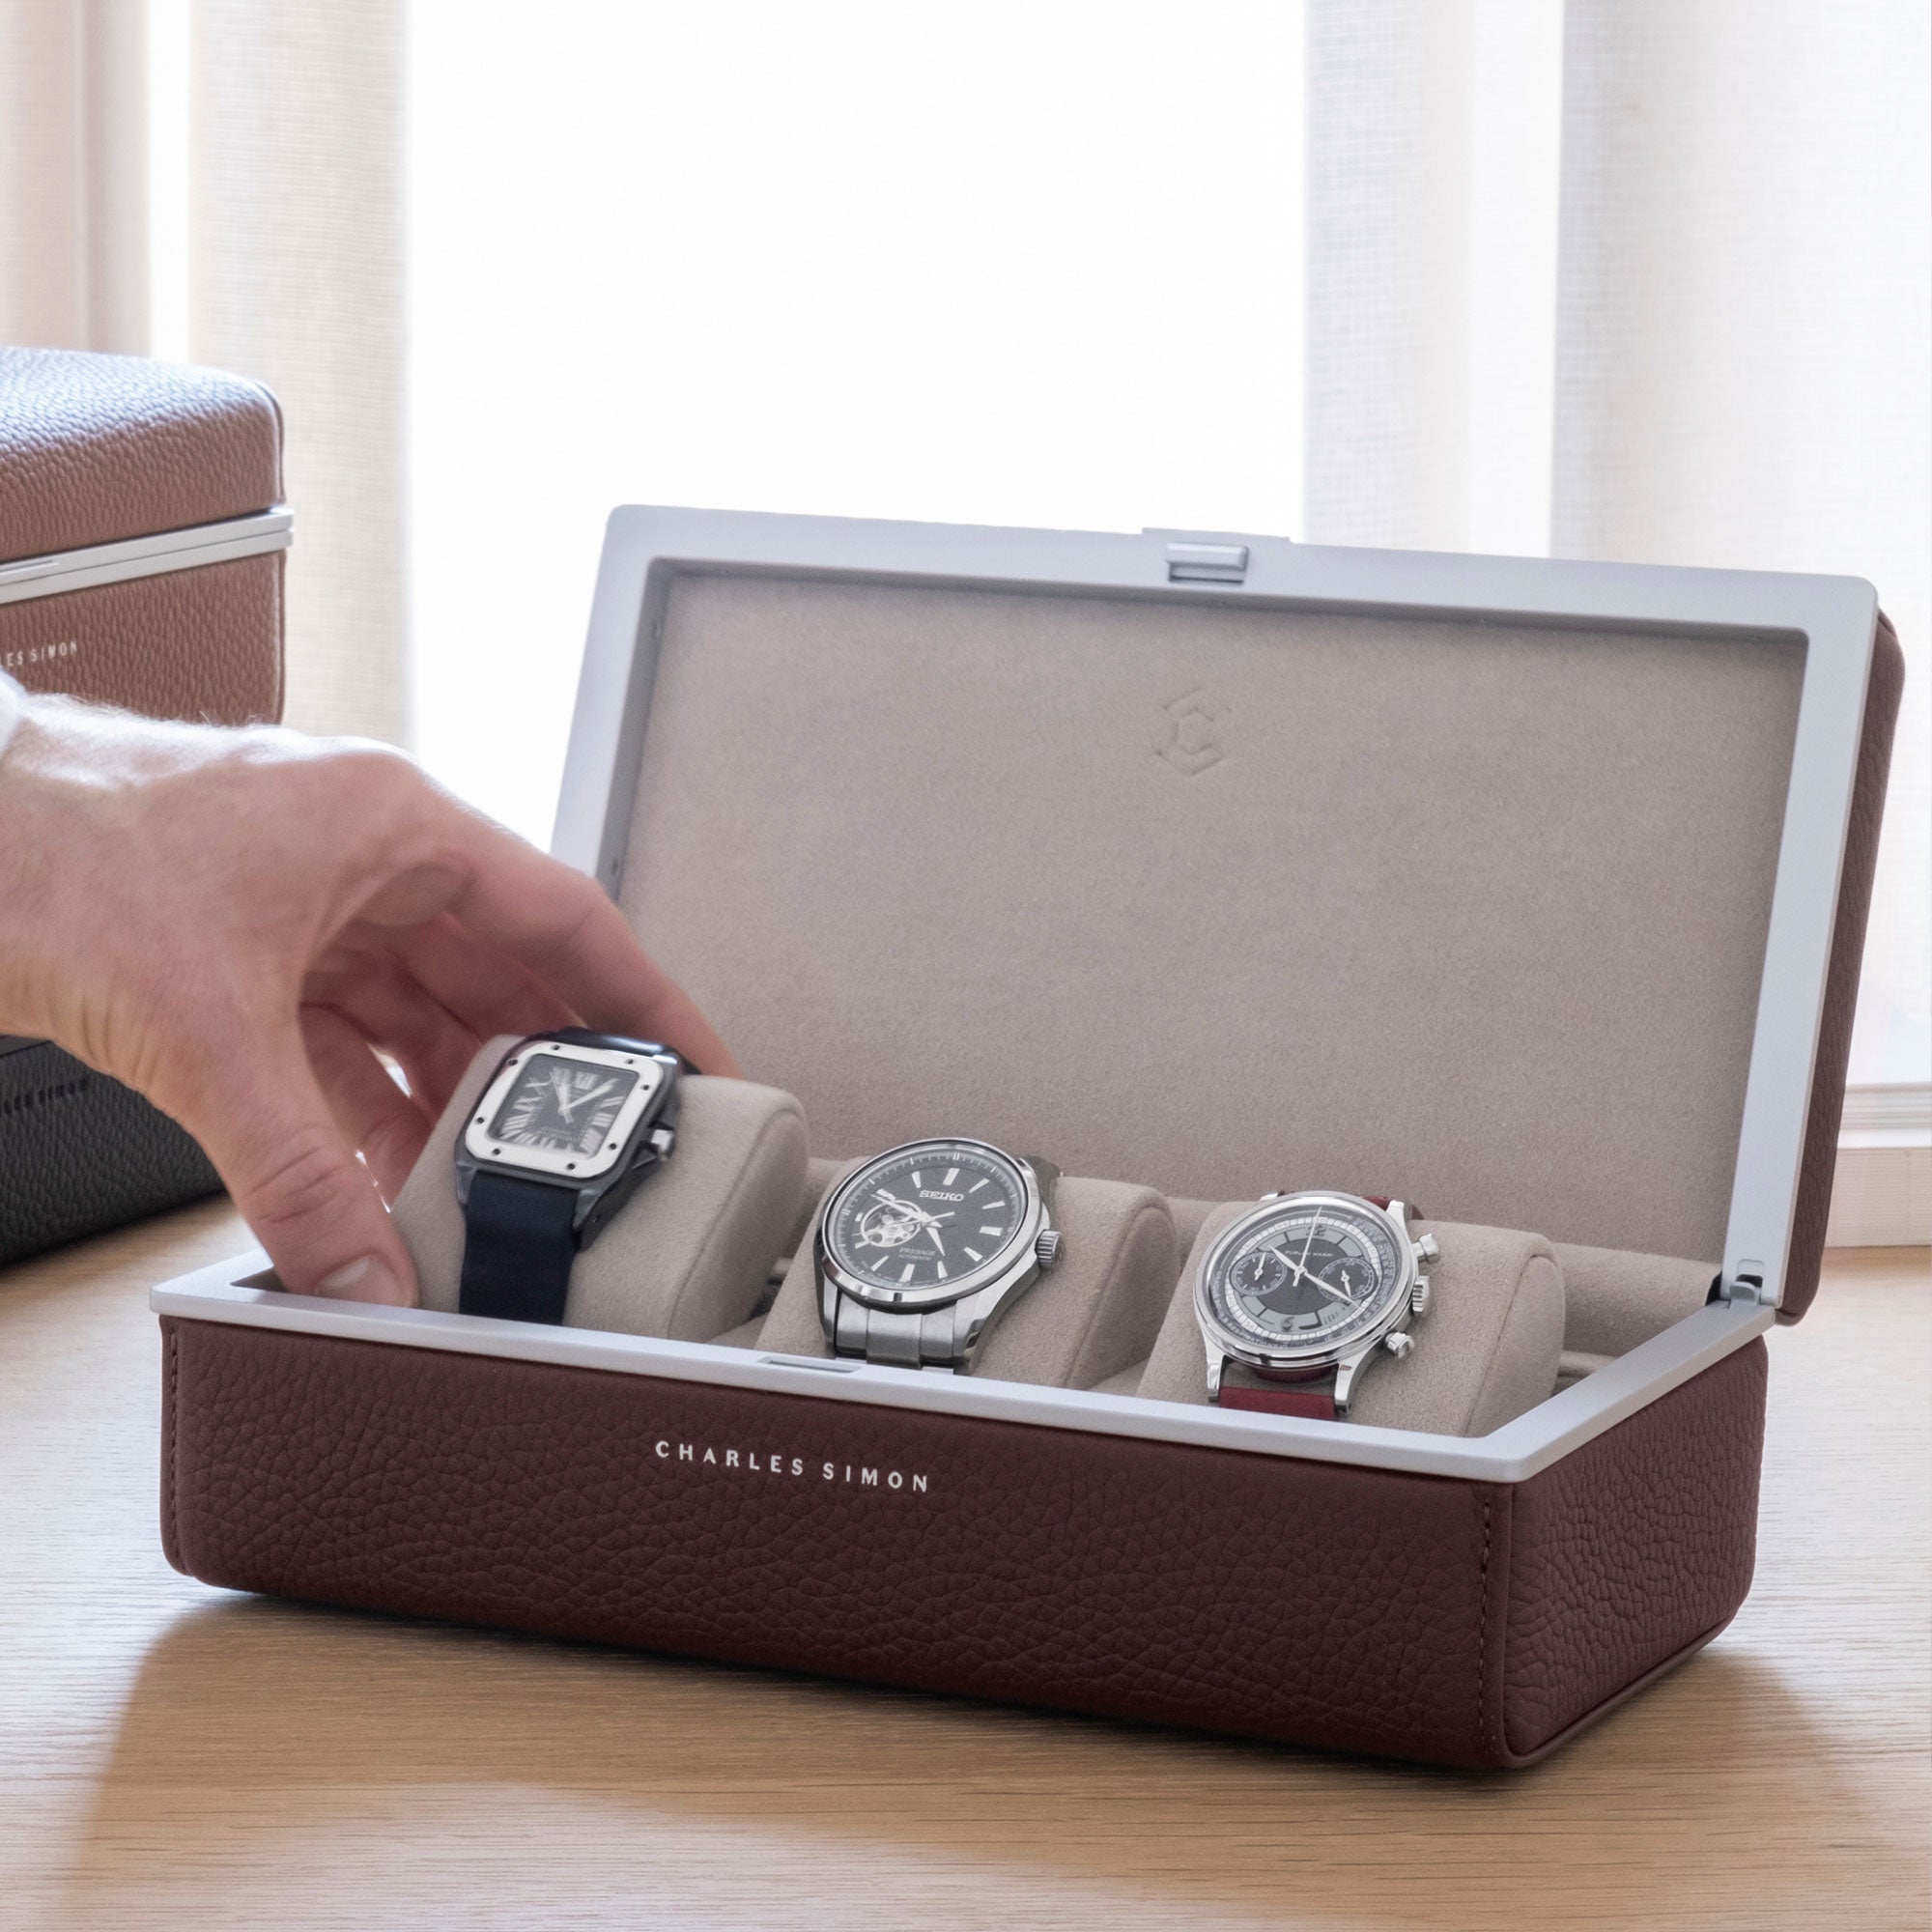 Charles Simon Eaton 3 Watch case in burgundy leather holding and displaying three luxury watches. Man is grabbing his Cartier watch showcased on a sea sand watch cushion from the handmade watch case.